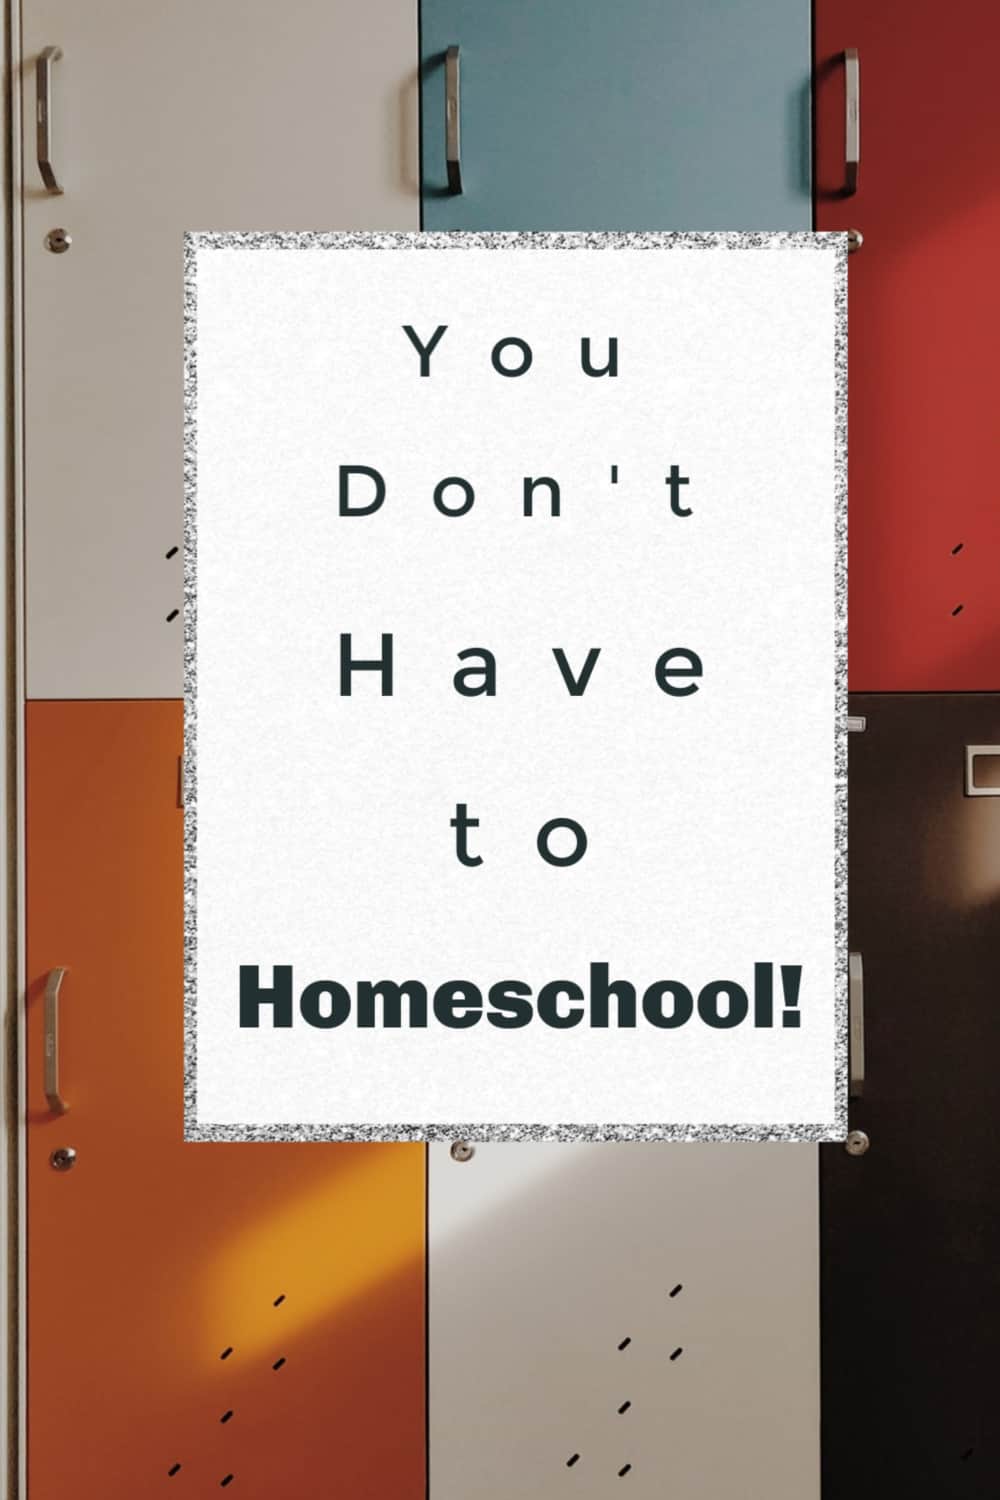 You don't have to homeschool! You may feel pressured to homeschool by circumstances. However, there are other options! 